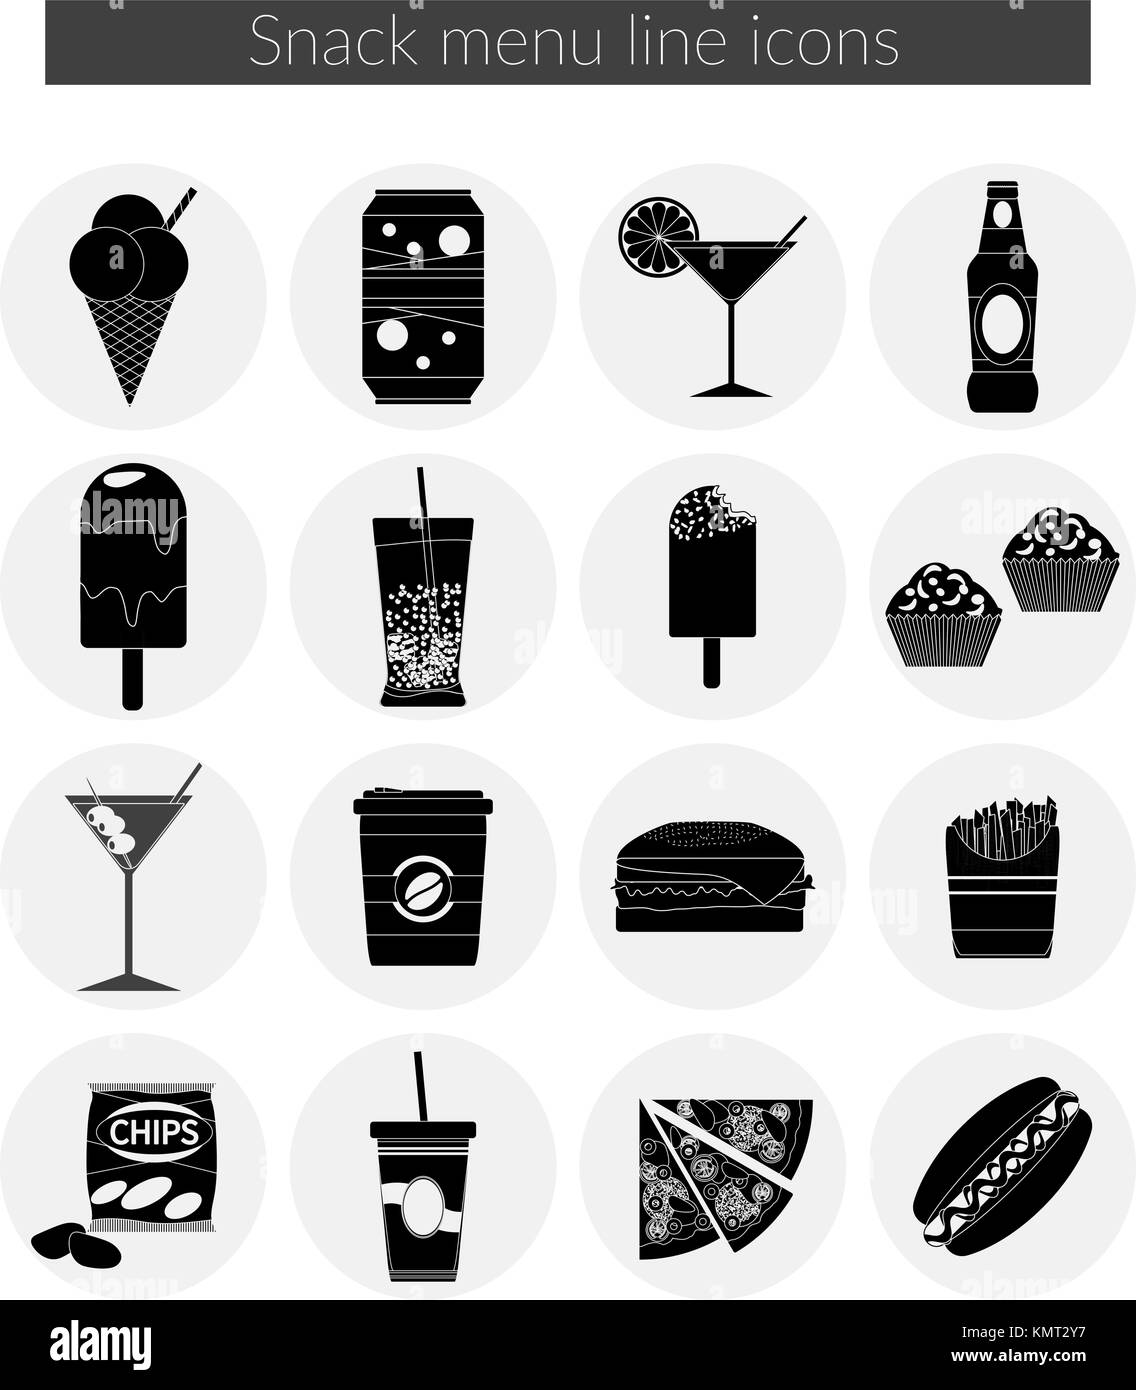 Snack Menu line icons set vector illustration of food, drink, coffee, hamburger, pizza, beer, cocktail, fastfood, cola, ice cream, potato chips, candy Stock Vector